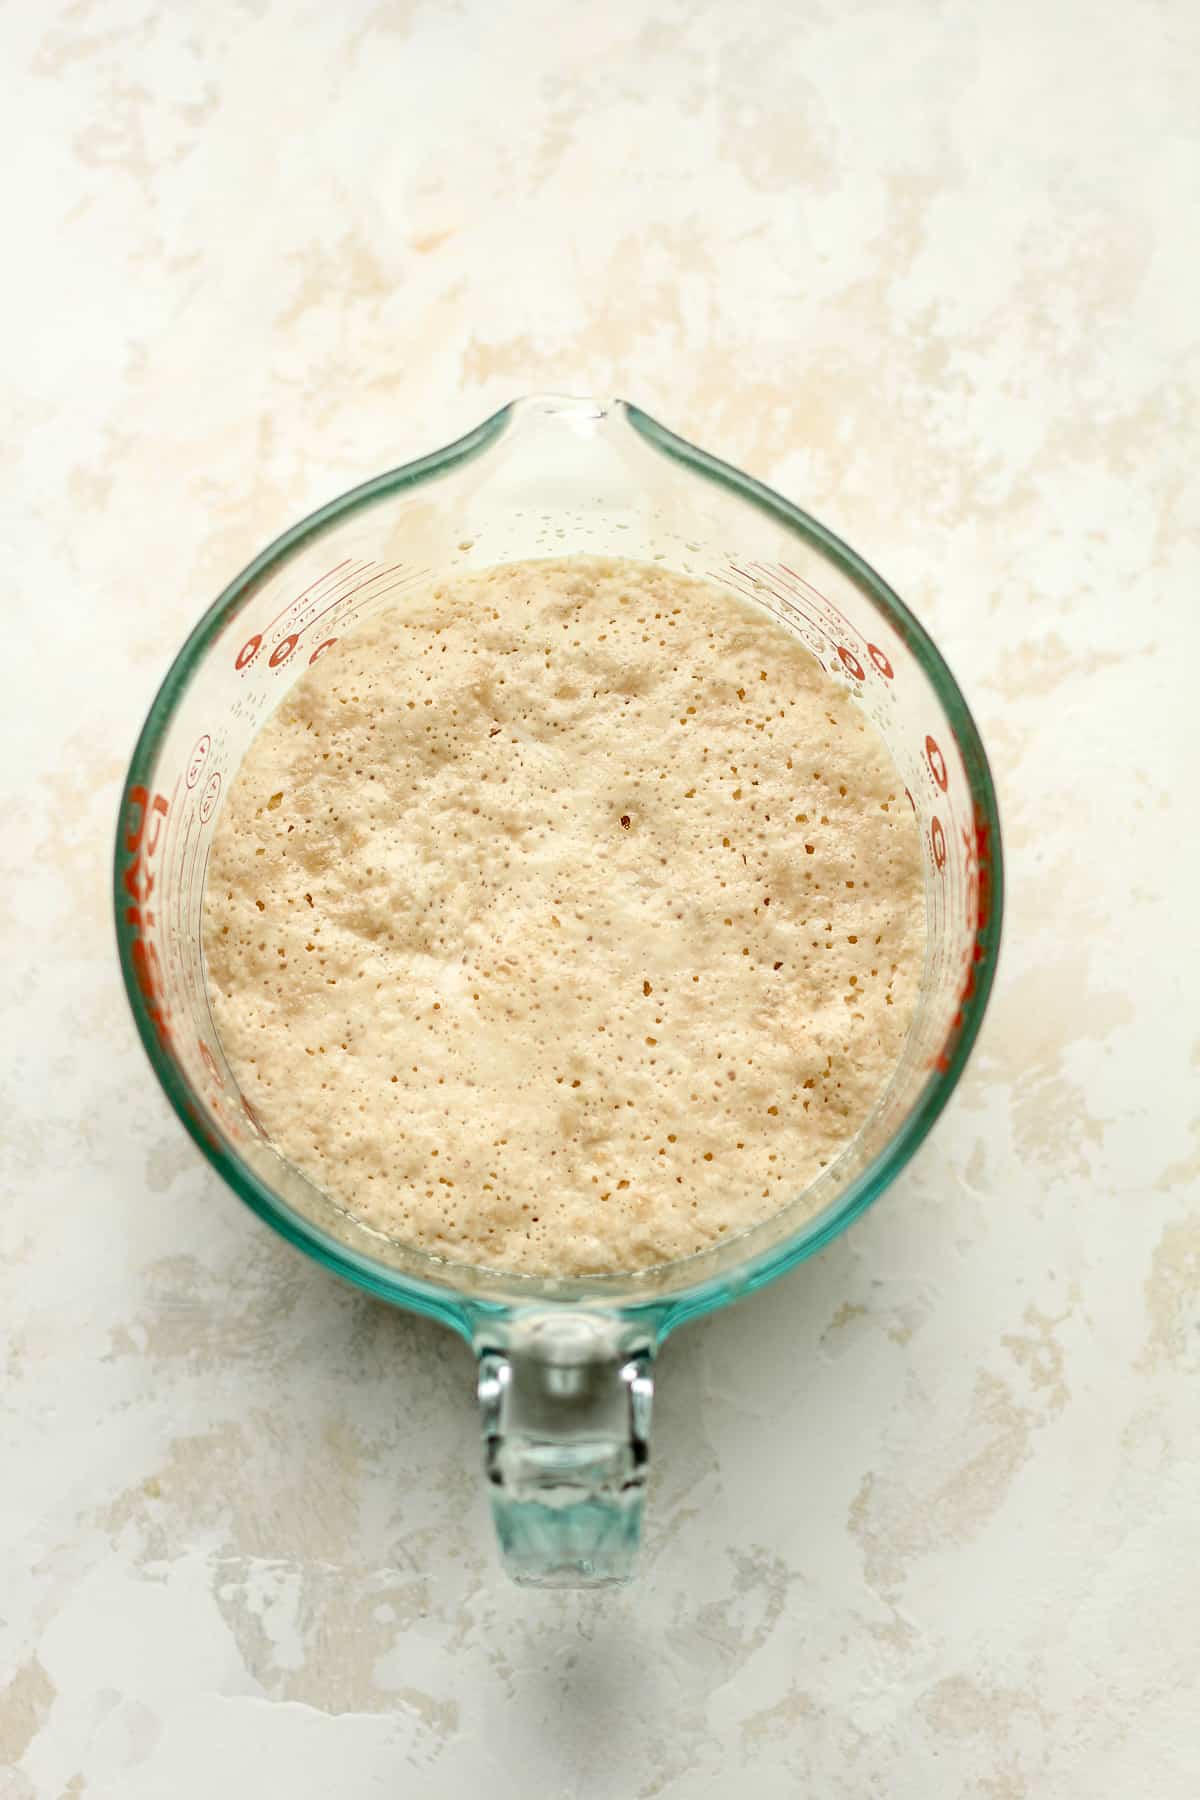 The yeast mixture in a large measuring cup.